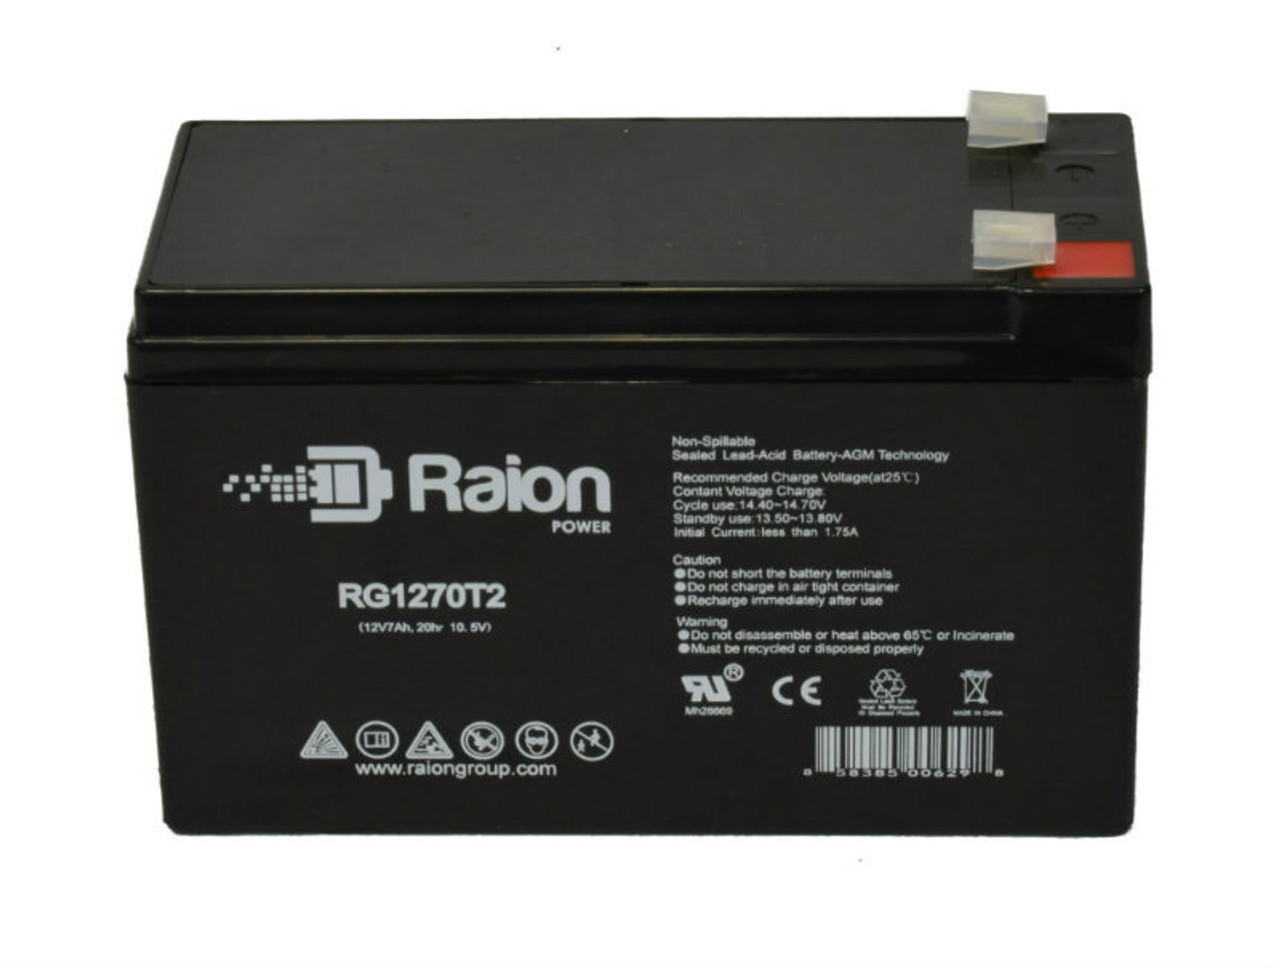 Raion Power RG1270T1 12V 7Ah Lead Acid Battery for North American Drager Anesthesia Machine